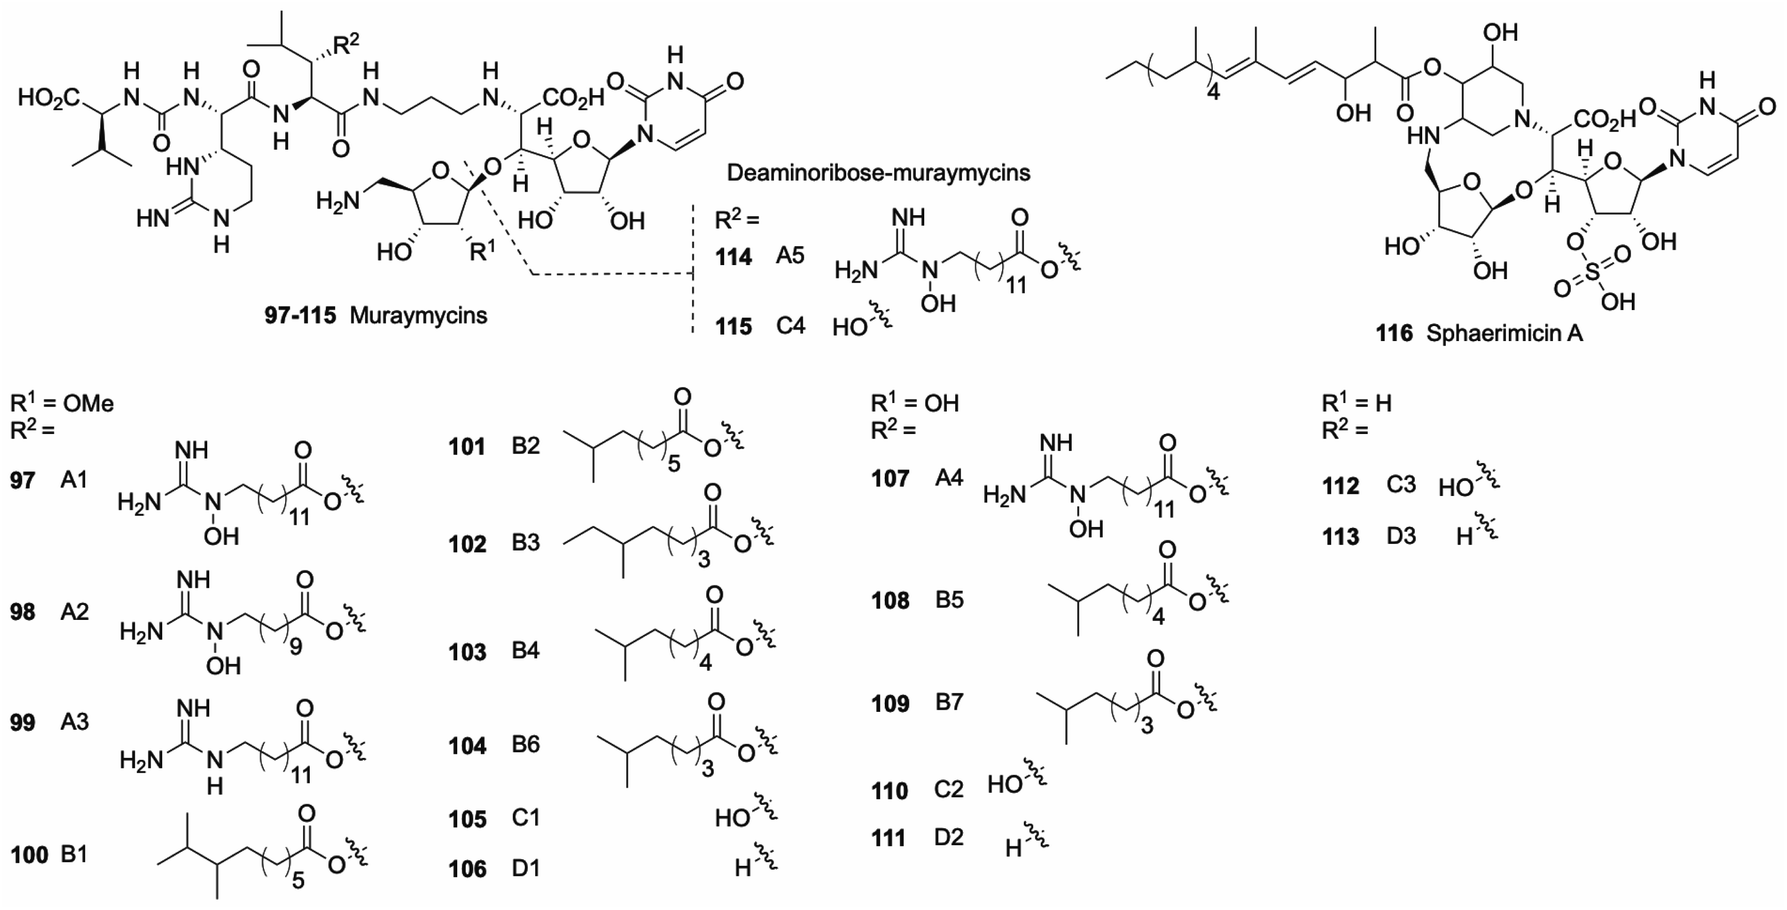 Identification and characterization of enzymes involved in the